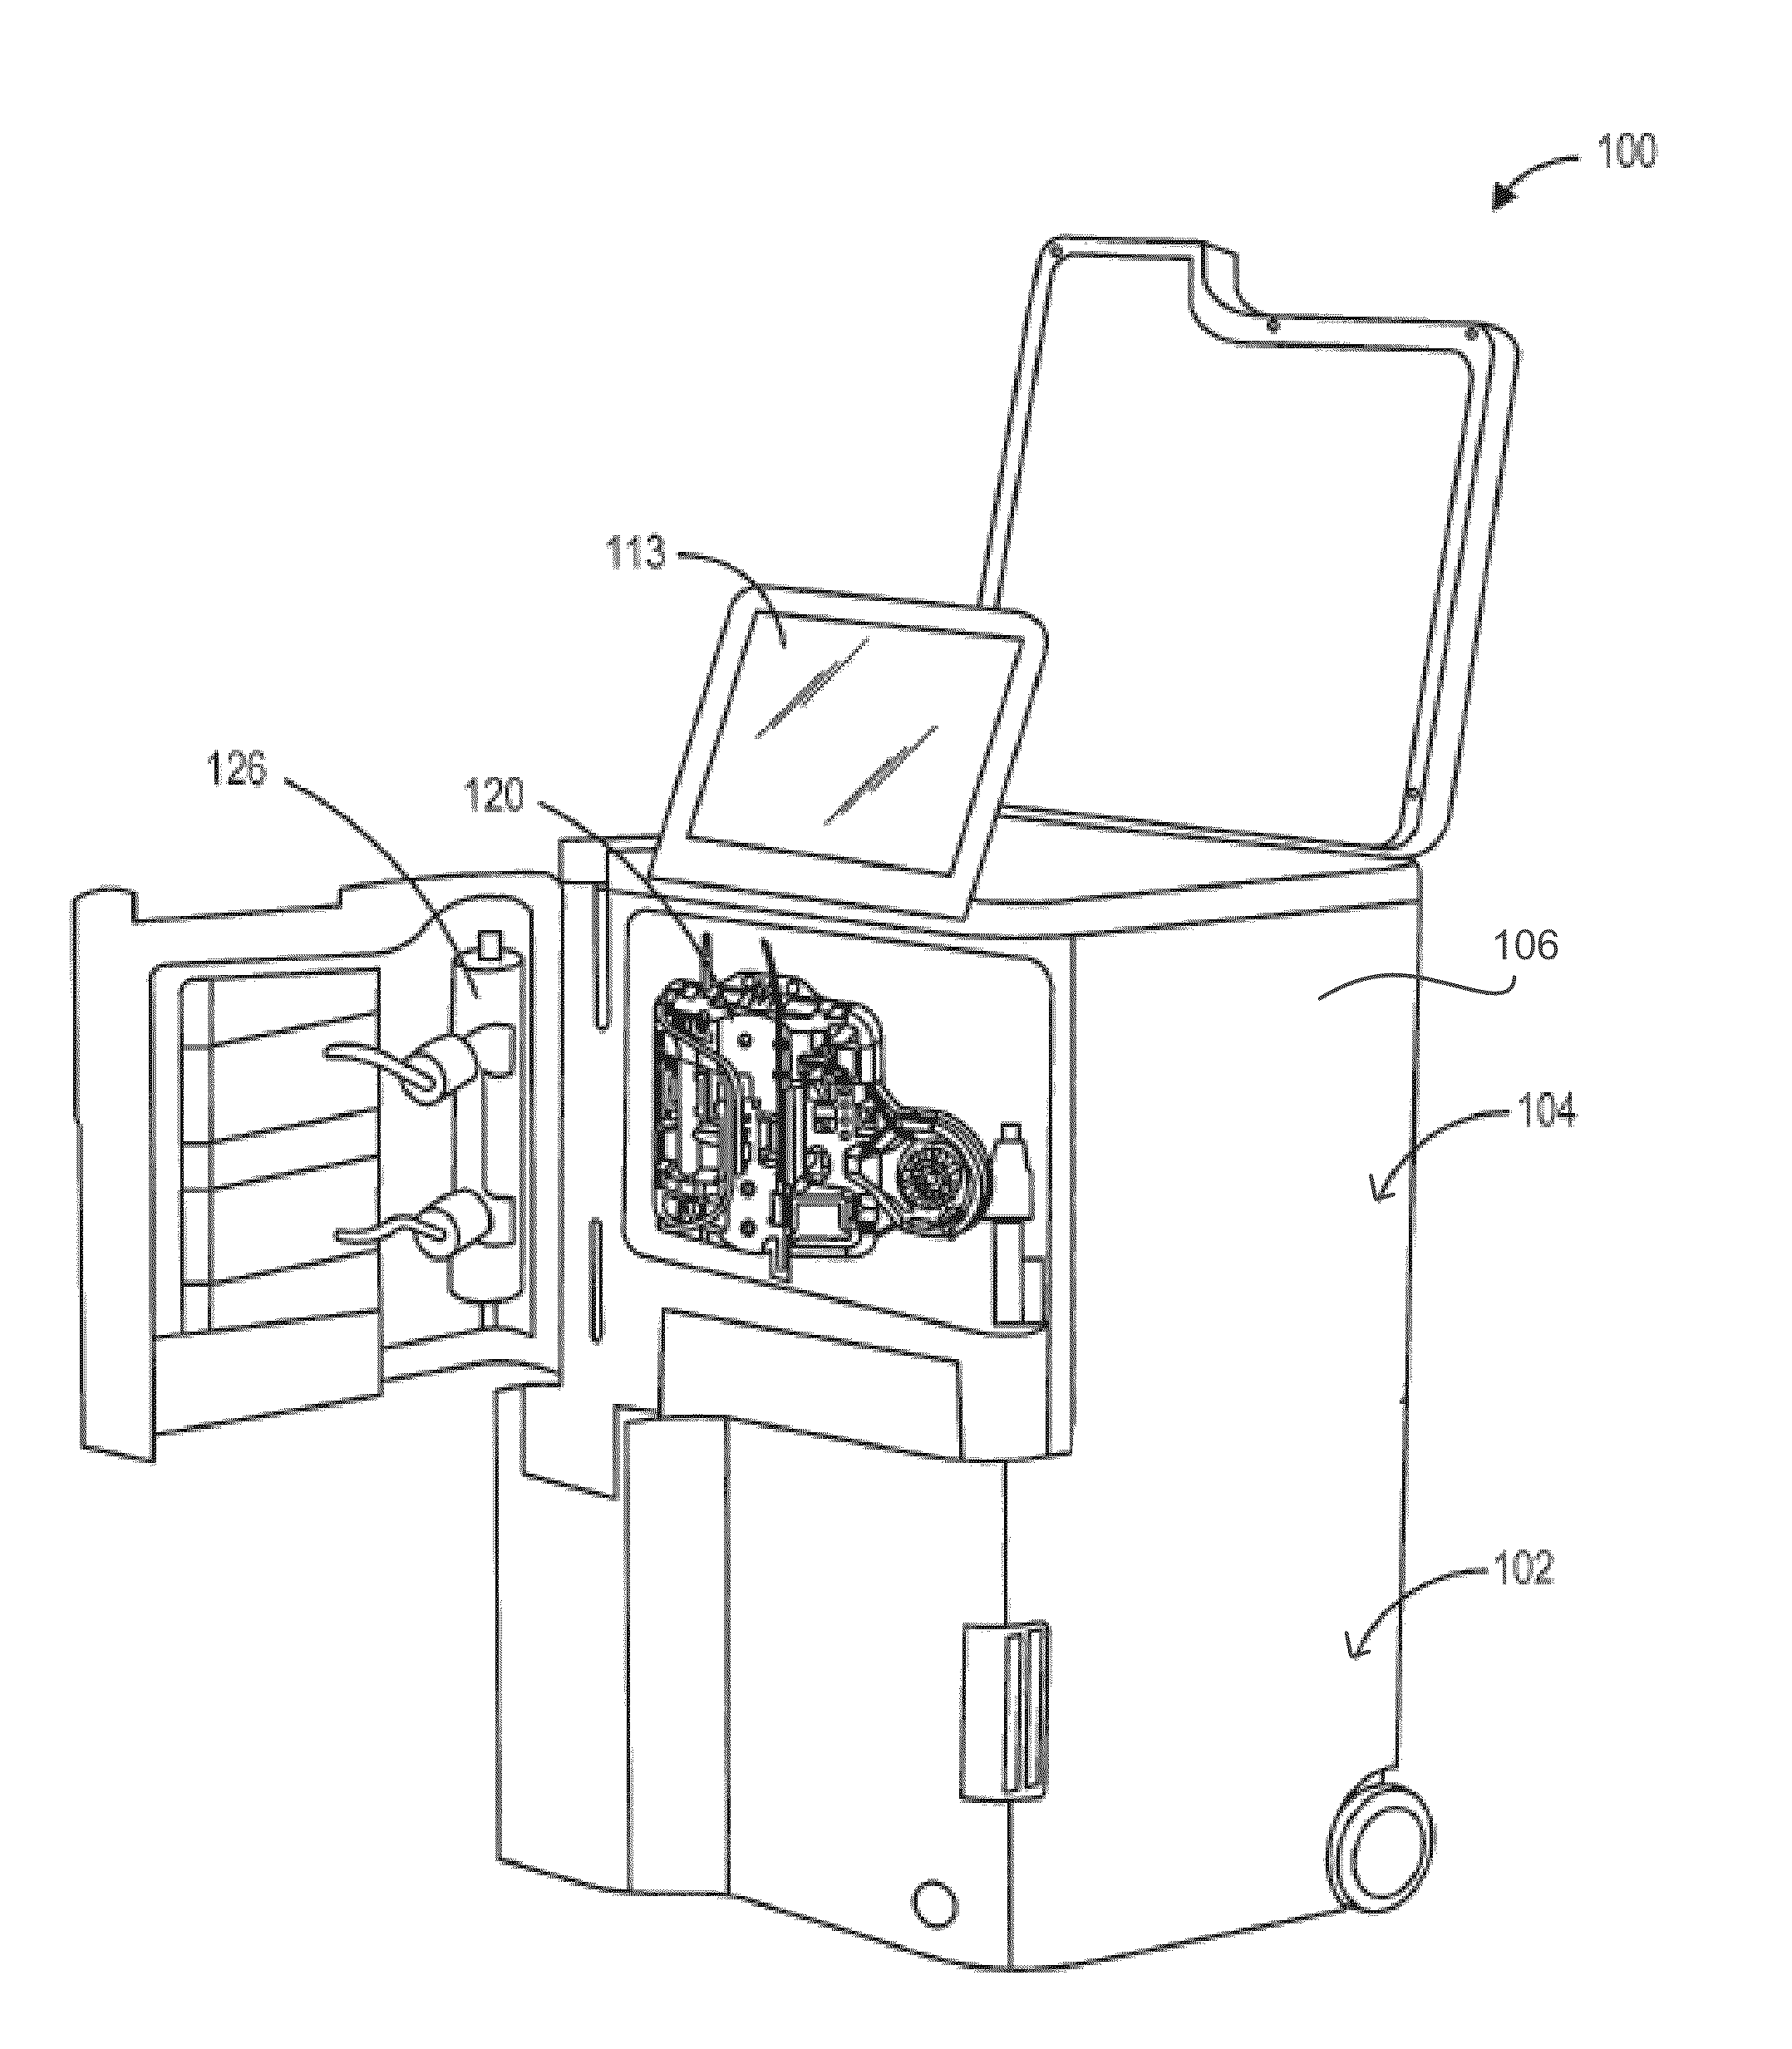 Dialysis system and methods